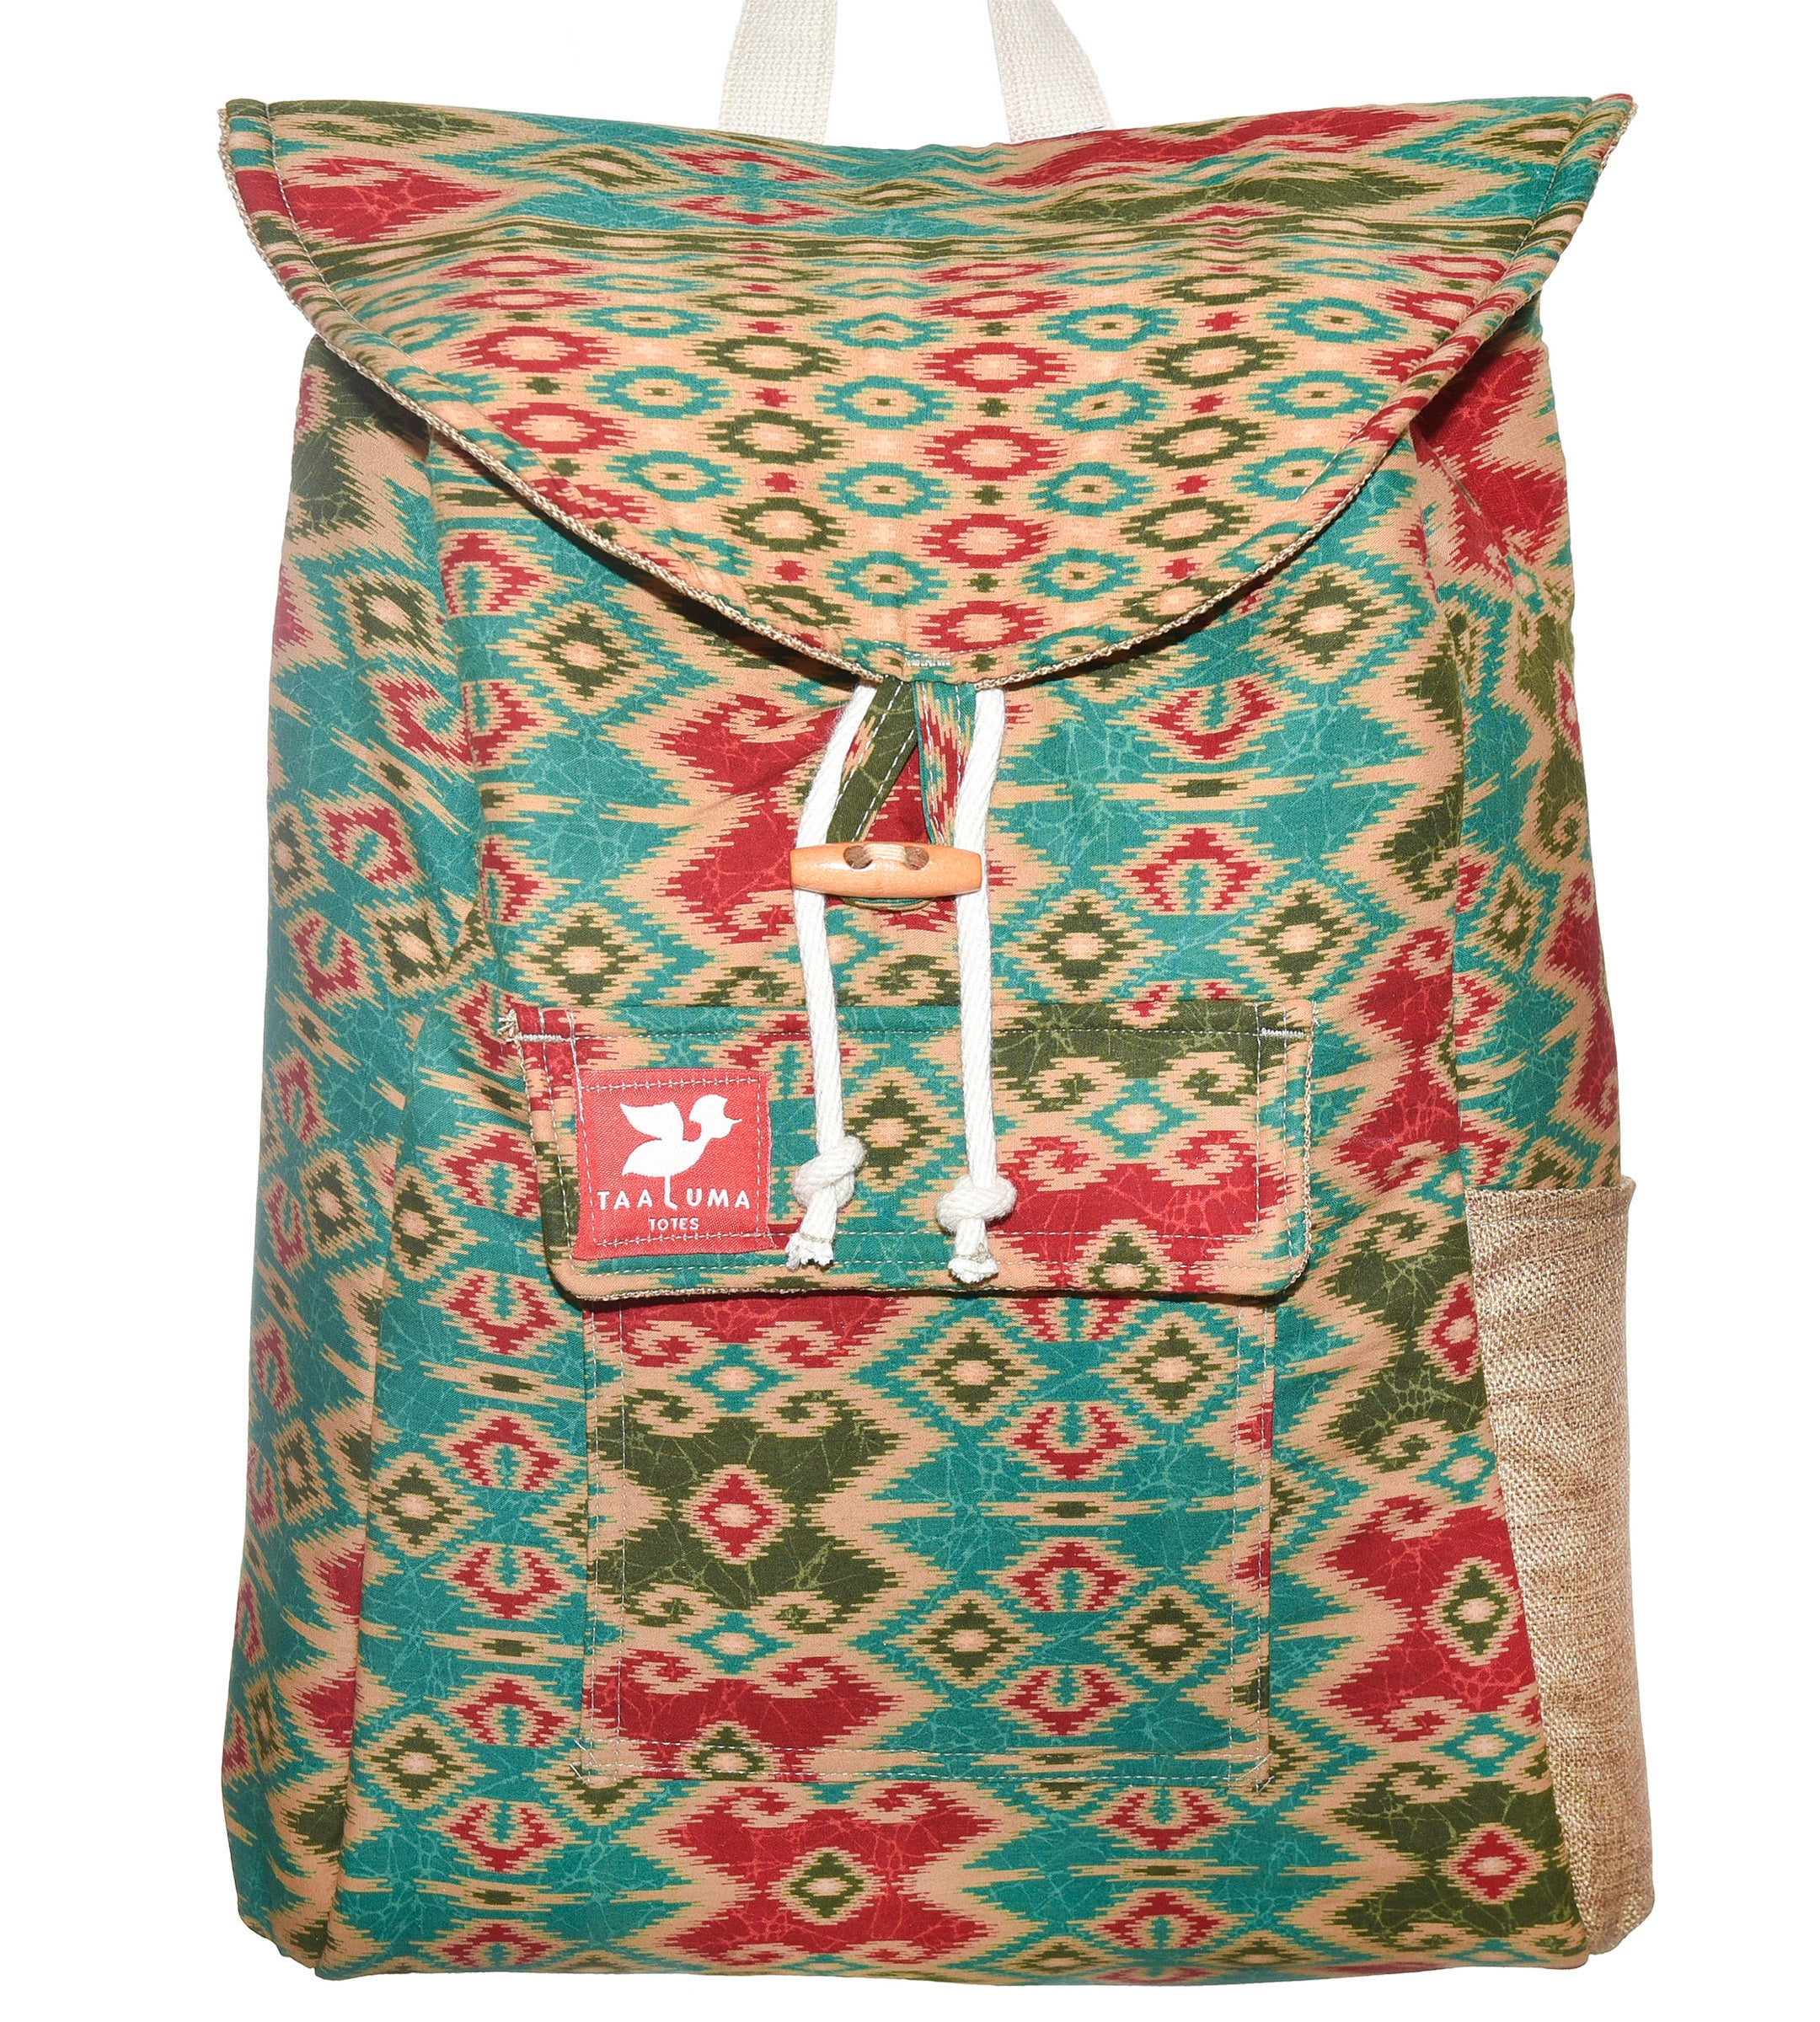 Indonesia Tote (by Martini Morris)